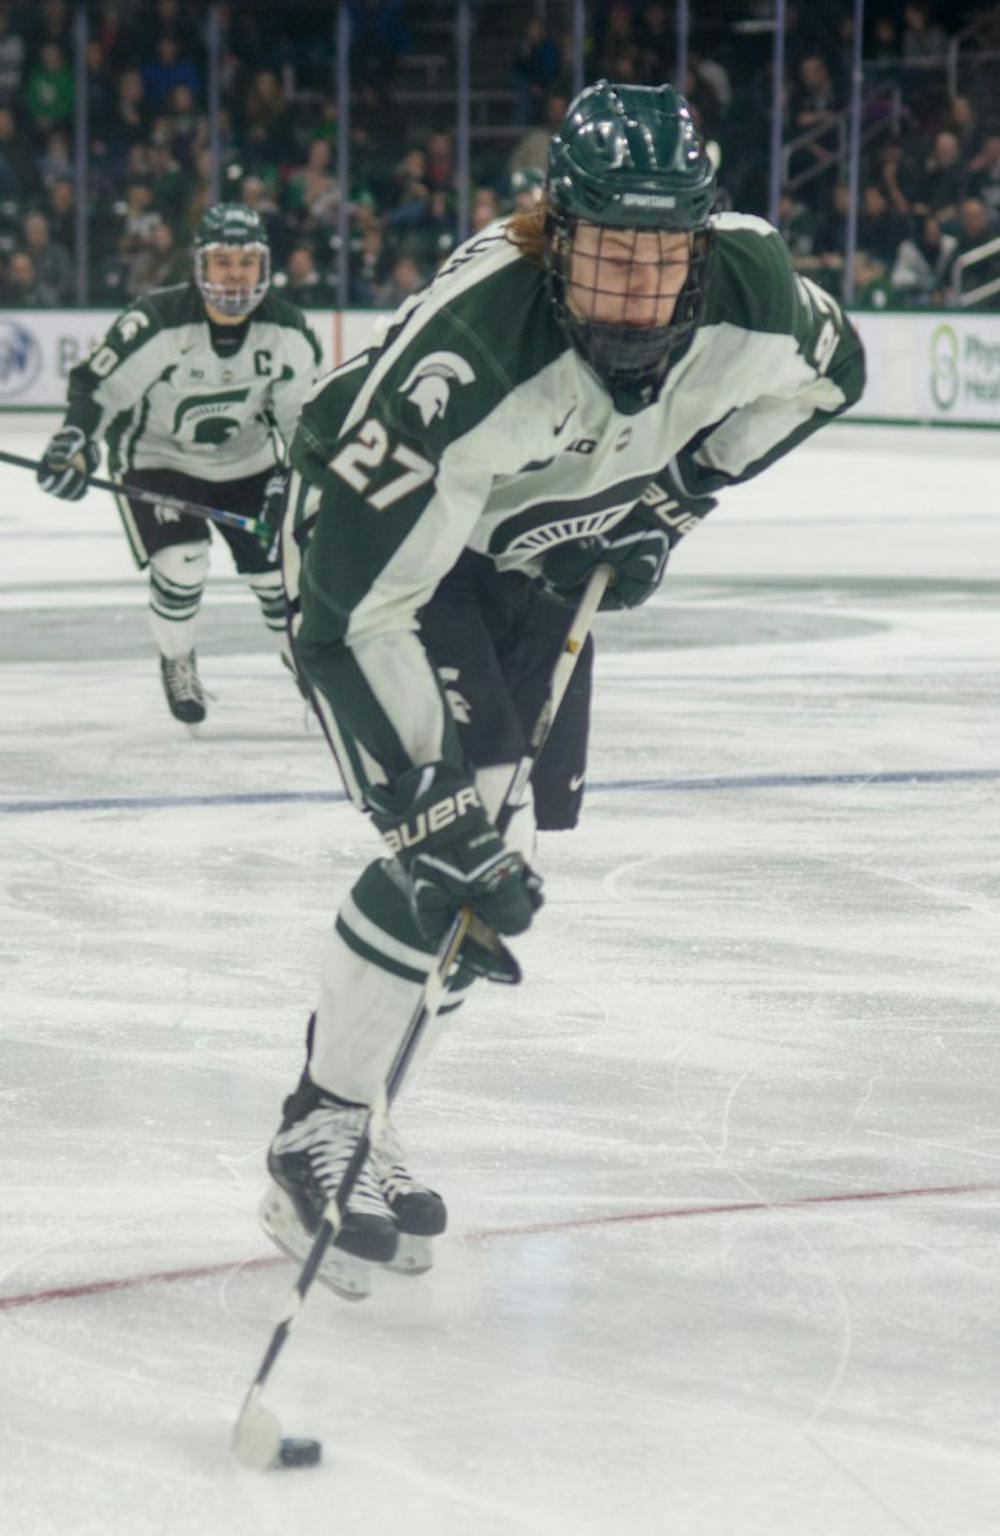 Freshman forward Mason Appleton takes control of the puck during the hockey game against Minnesota on March 4, 2016 at Munn Ice Arena. The Spartans were defeated by the Gophers, 4-2.